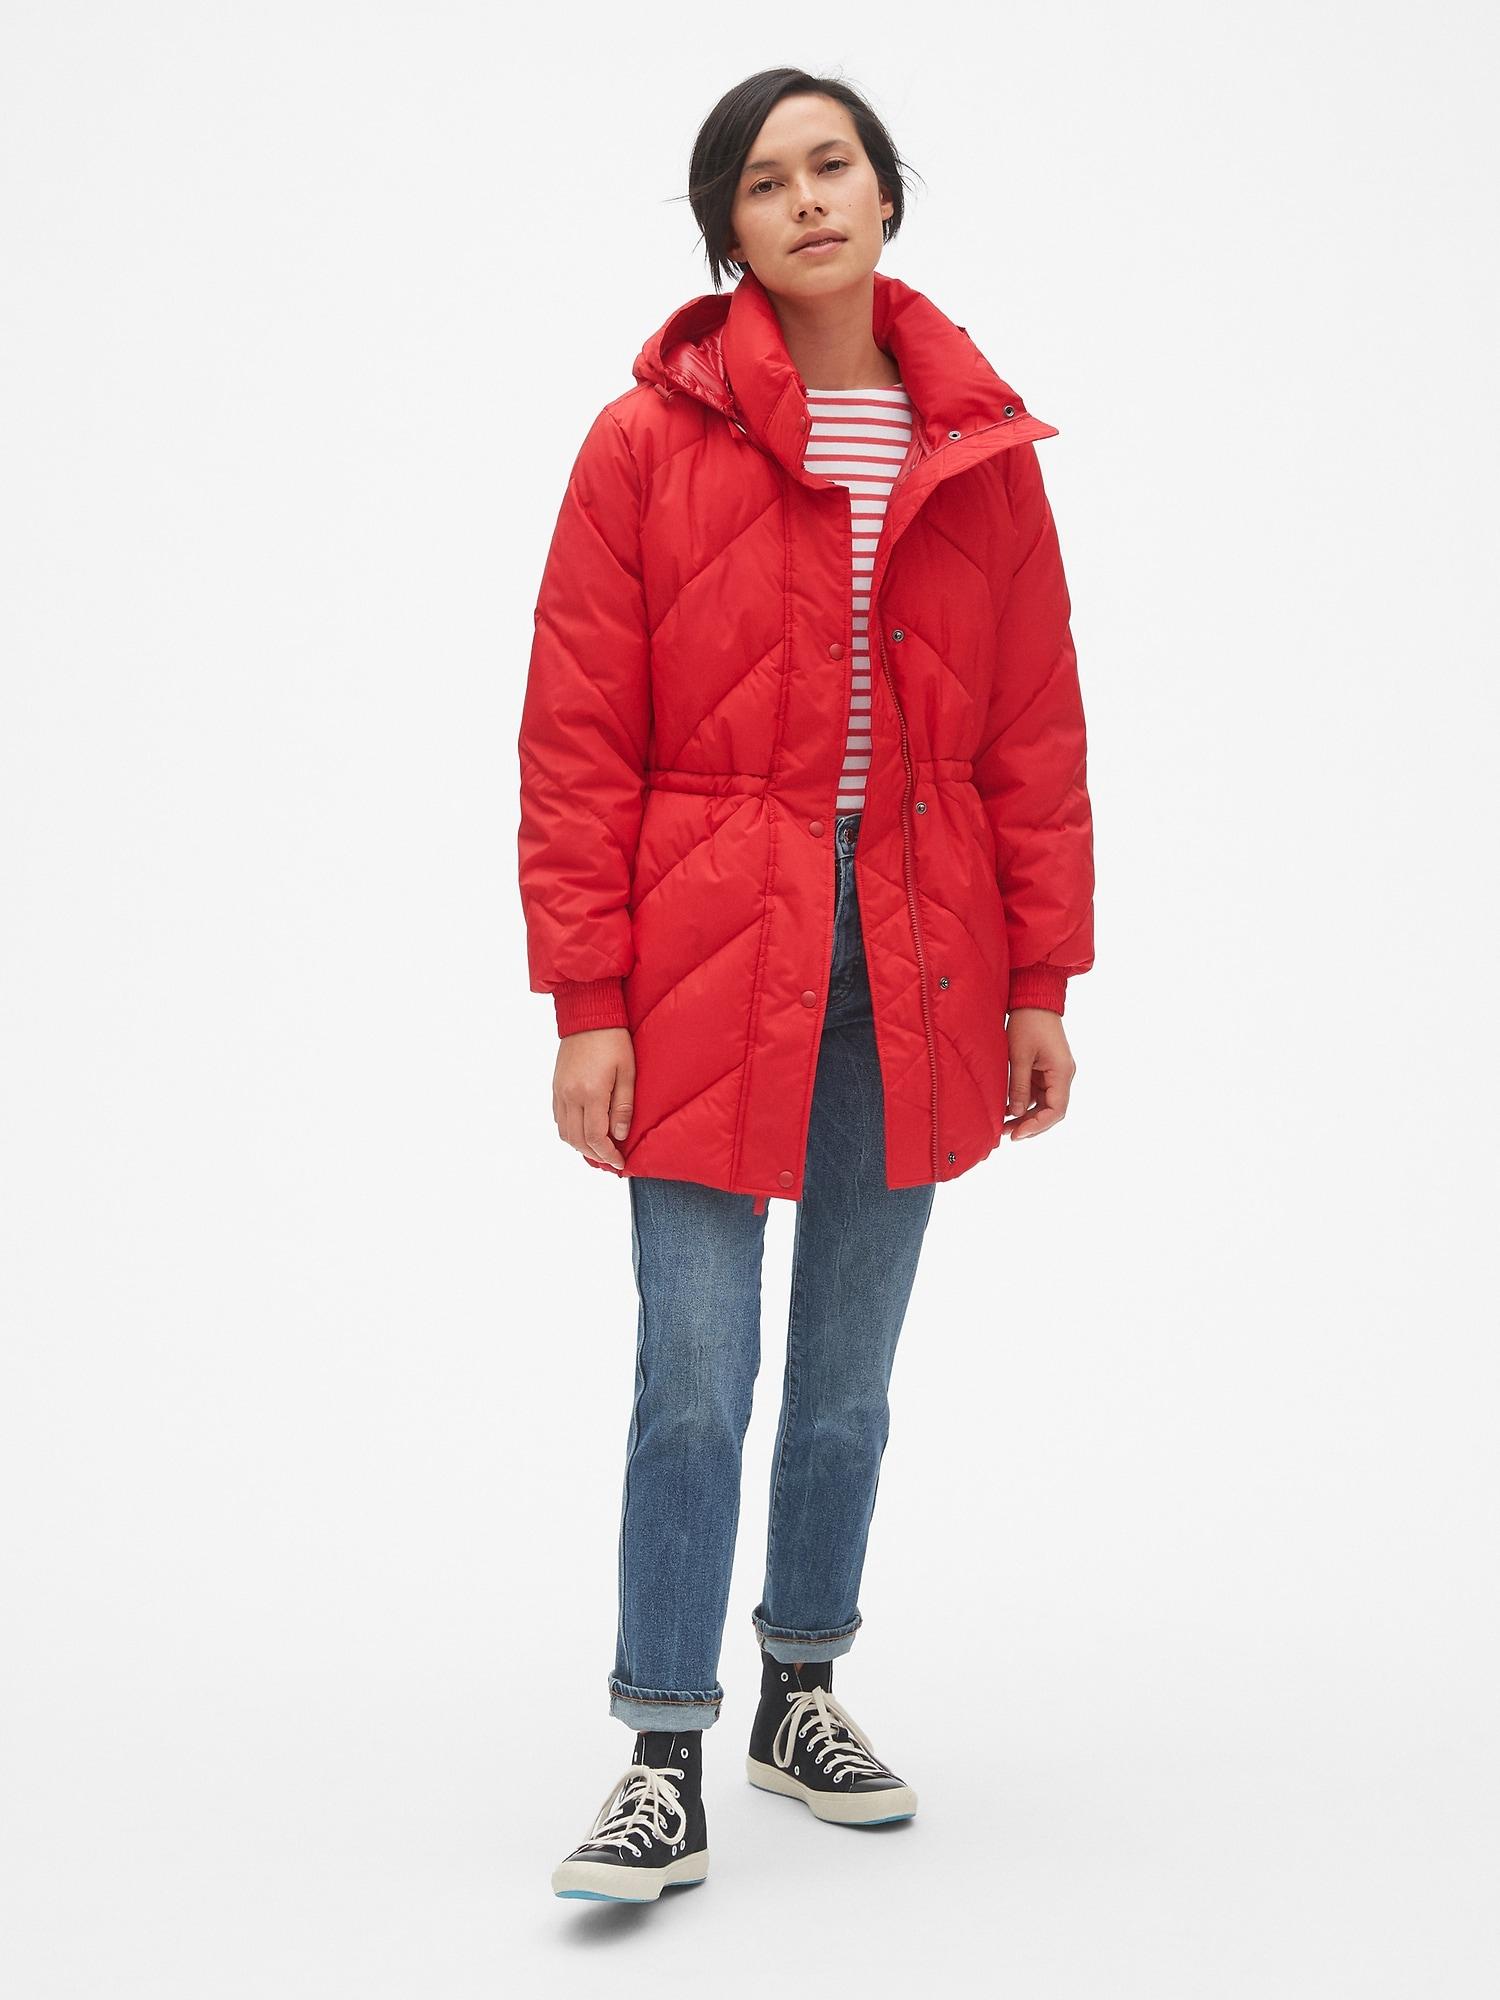 gap red puffer jacket OFF 62% - Online Shopping Site for Fashion &  Lifestyle.